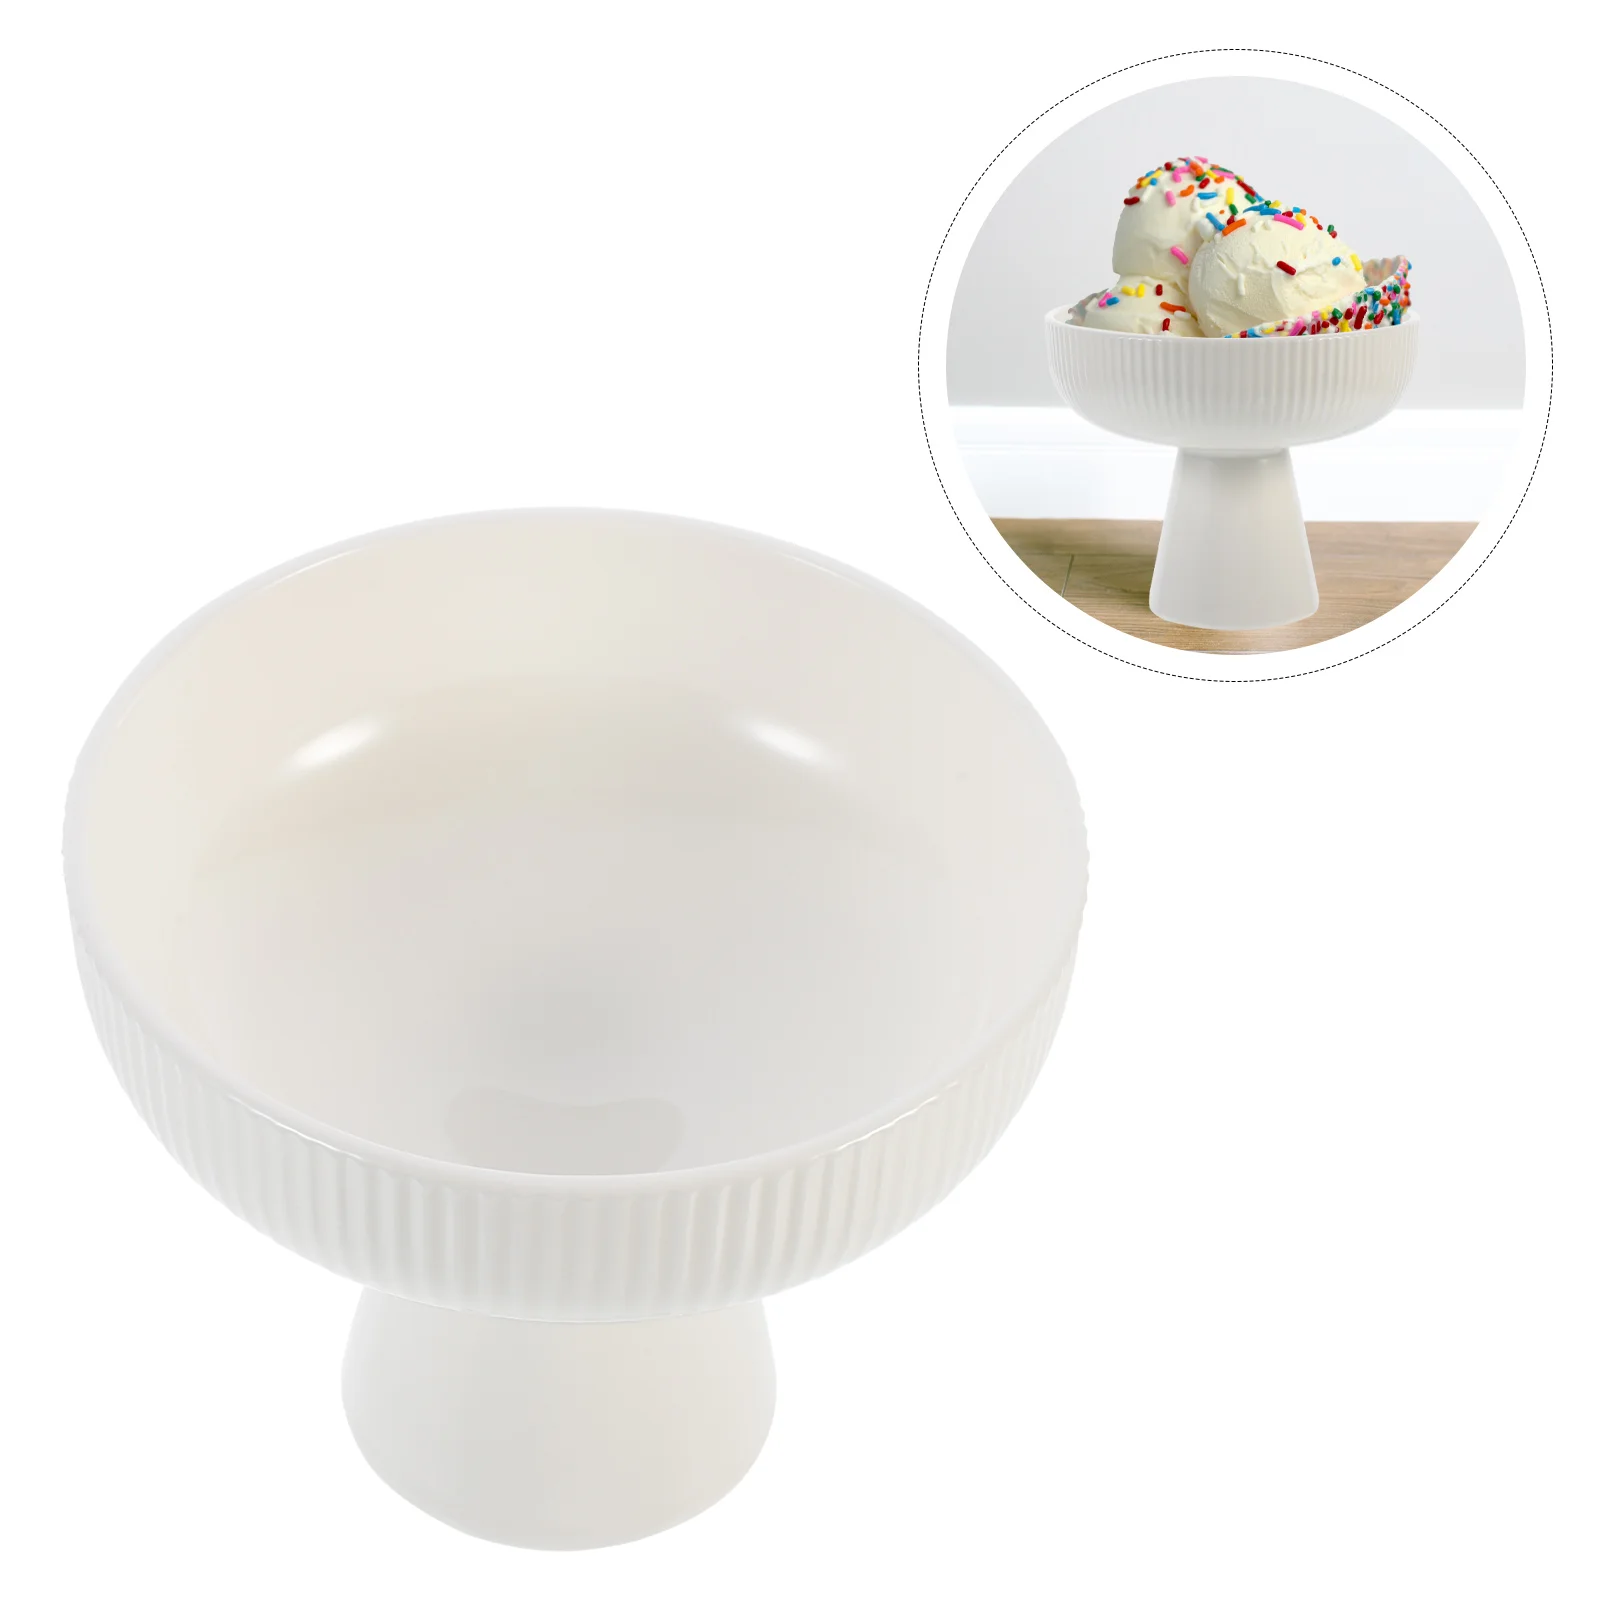 

Ice Cream Bowl Cookie Containers Lids Ramen Bowl Food Storage Container Mousse Cup Sugar Bowl Snack Bowl Ceramics Tulip Bowl